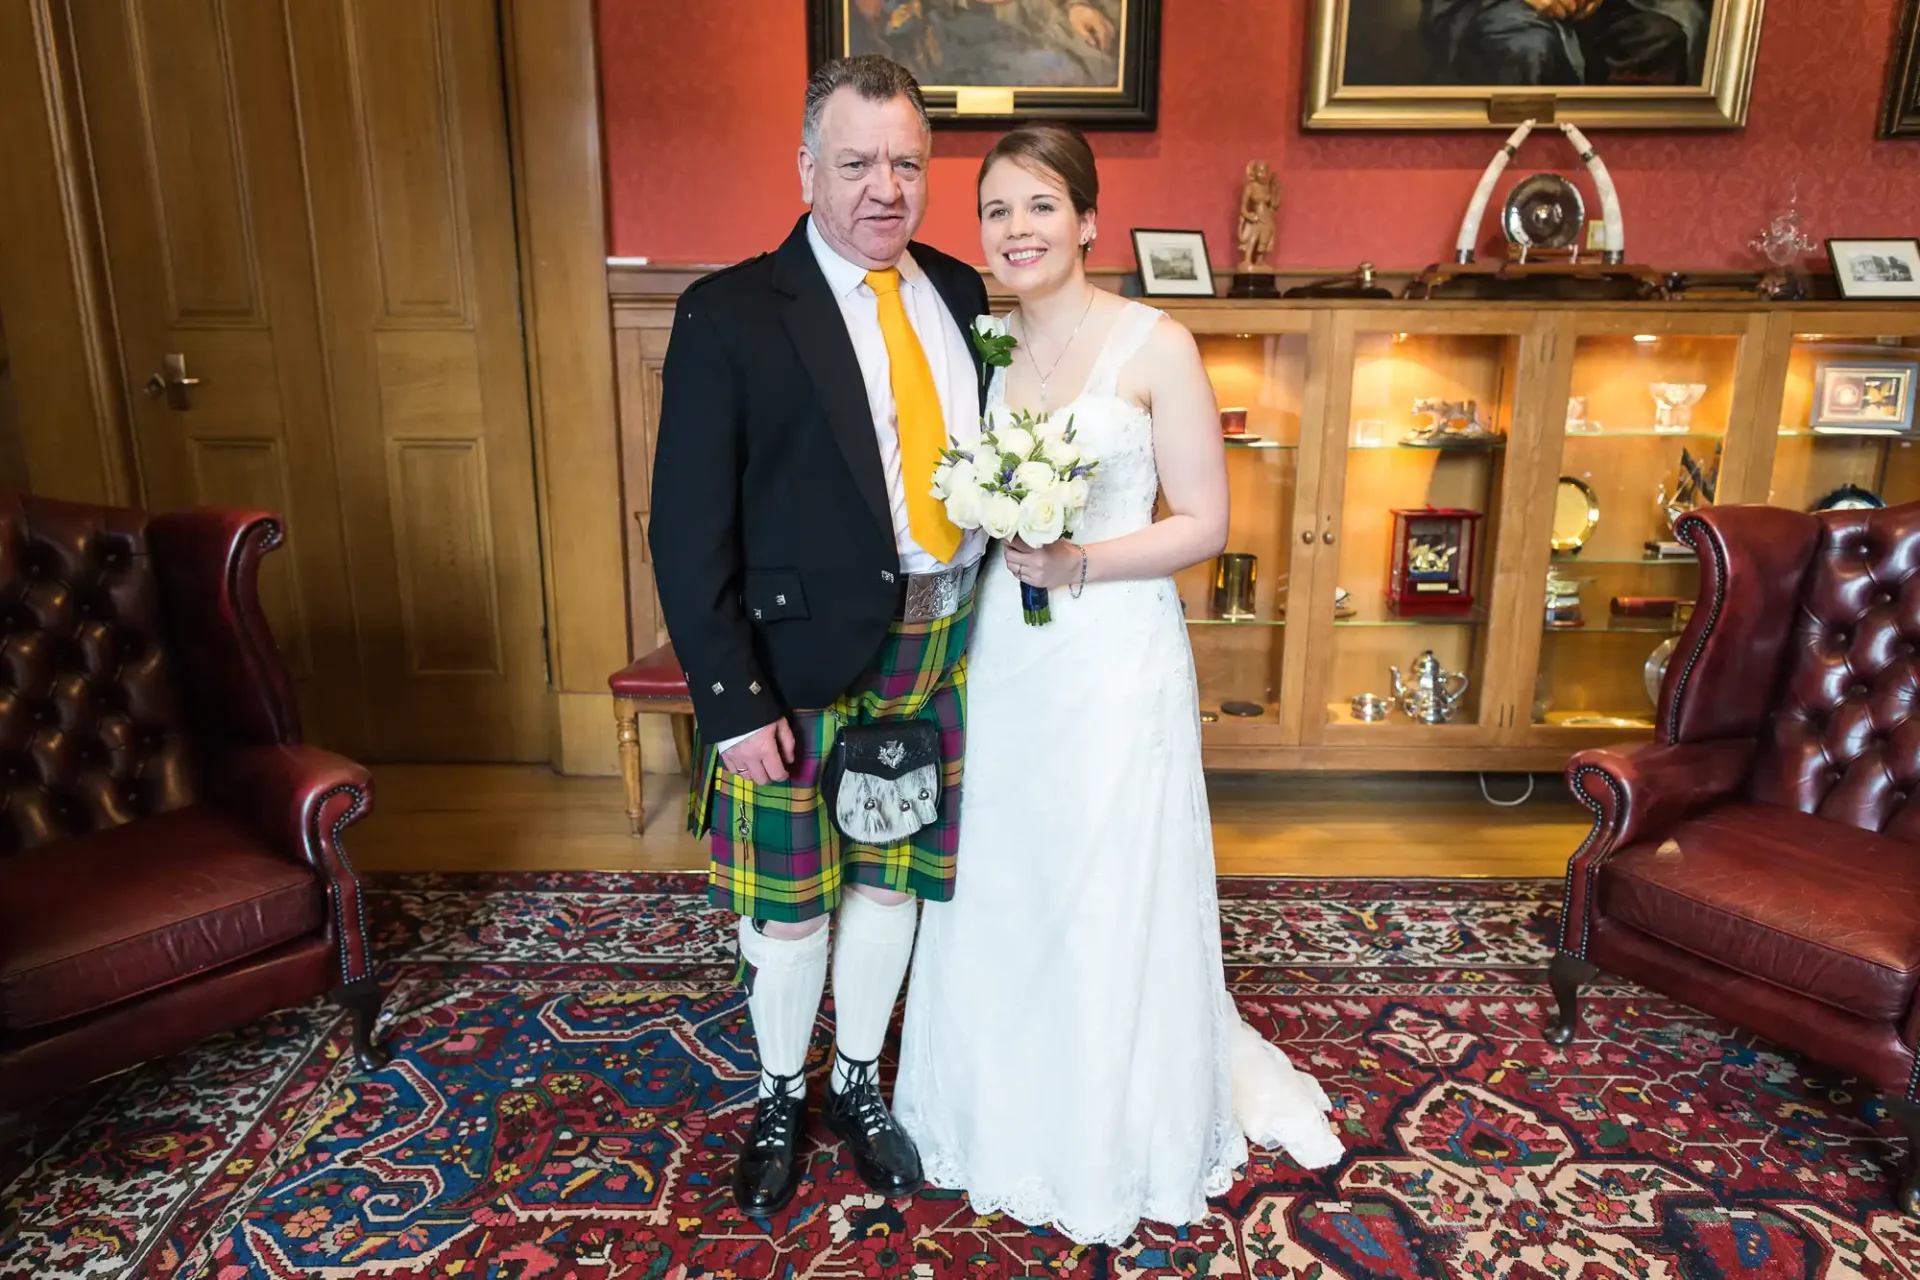 A bride and groom pose for a photo indoors; the groom wears a tartan kilt and the bride is in a white gown, holding a bouquet. they stand smiling between two red leather chairs on a patterned carpet.